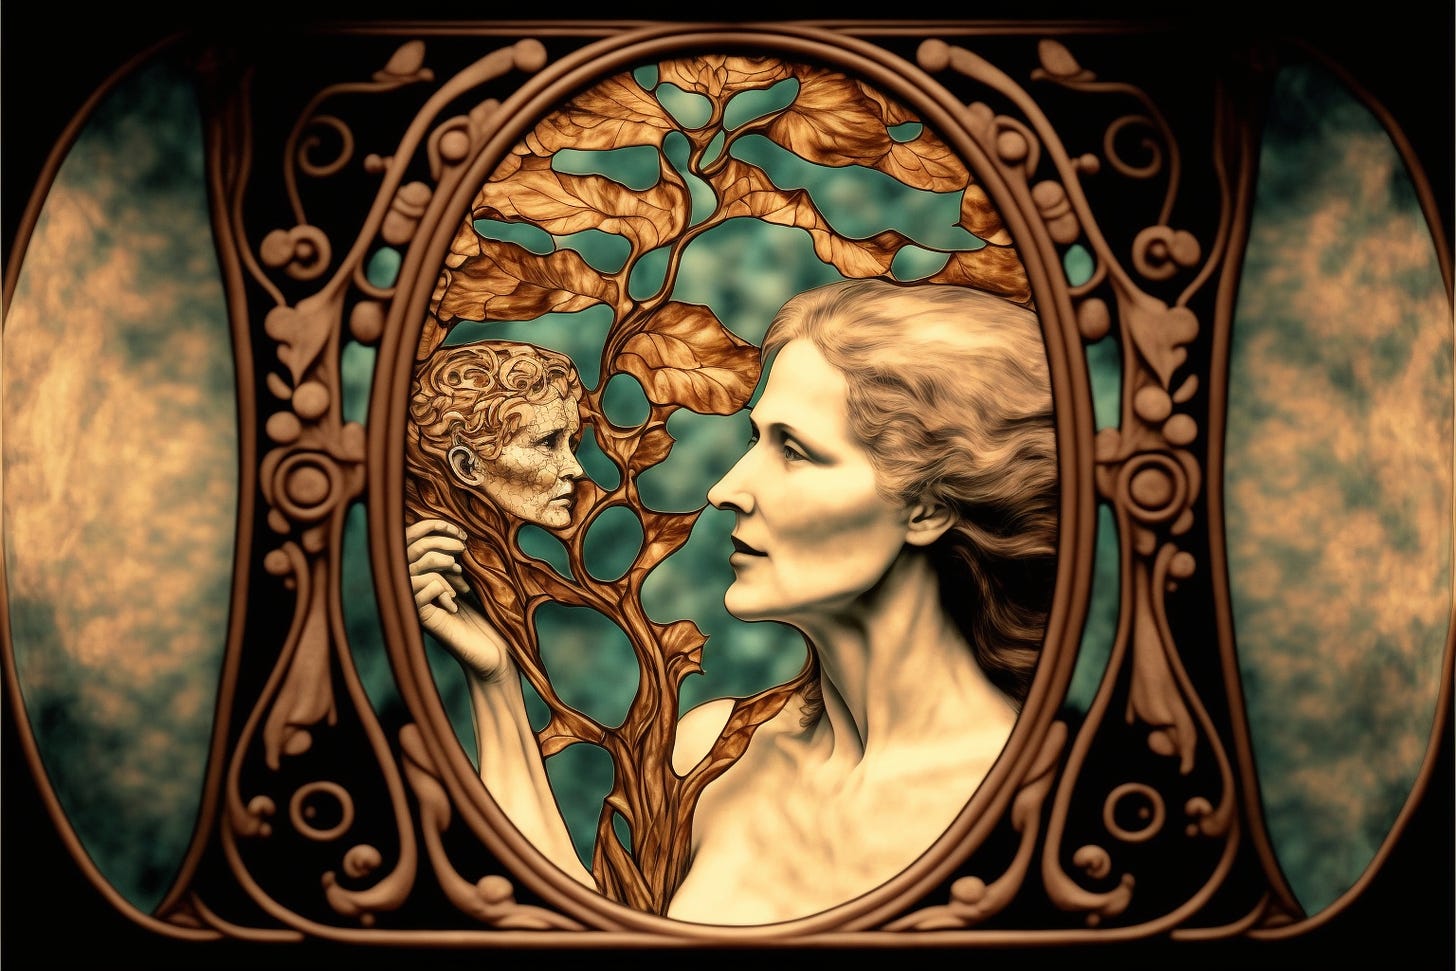 ornamental stained glass window: a middle-aged woman holding a doll's head in her hand that looks very youthful and very old at the same time